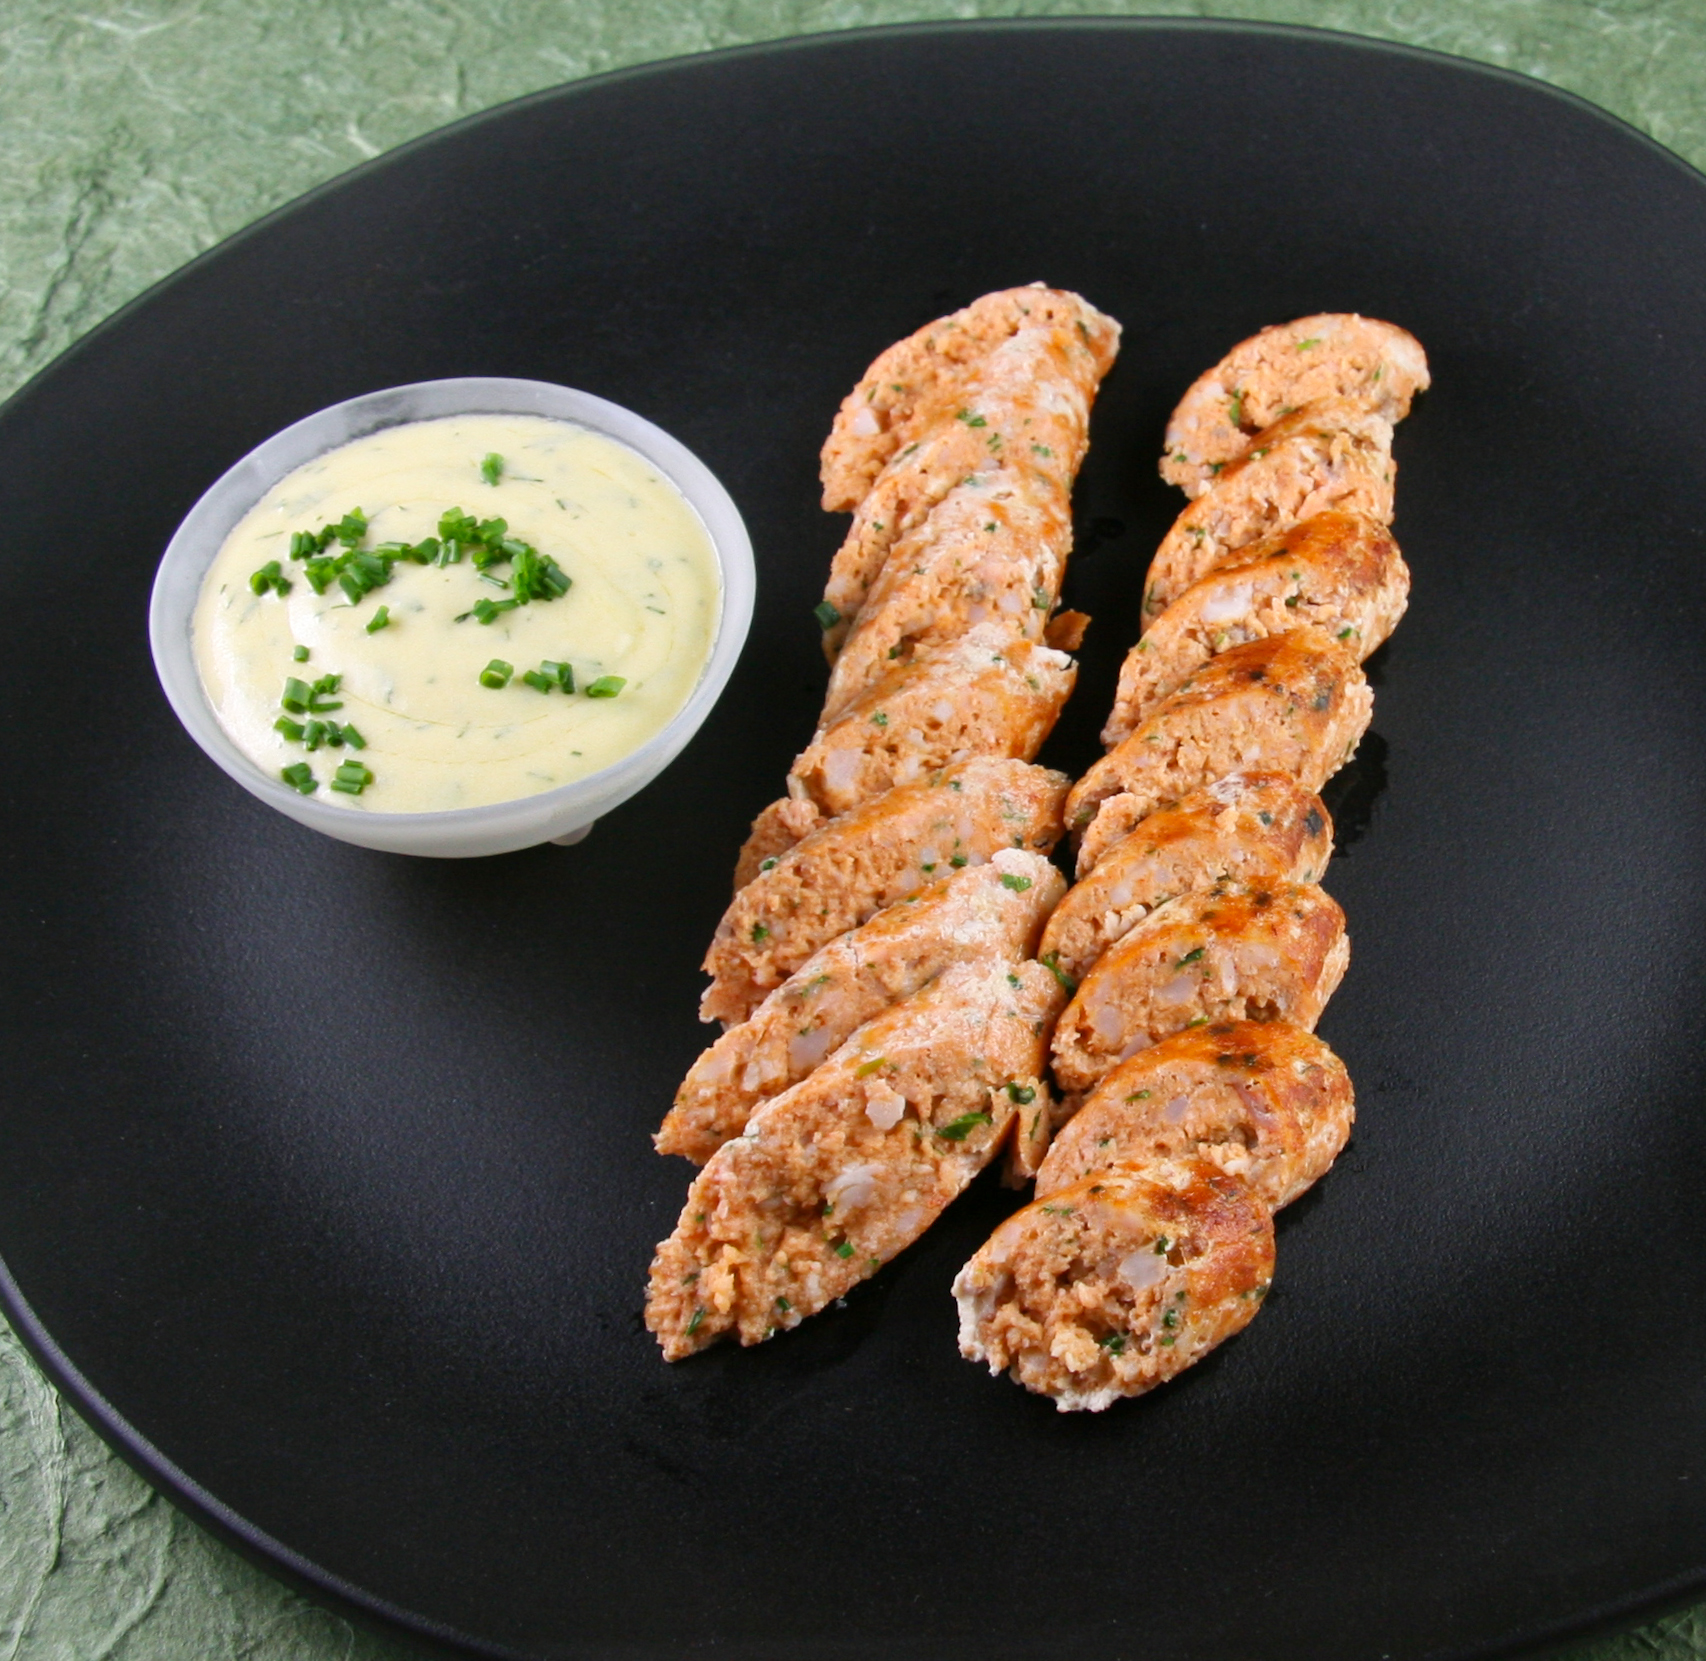 Seafood Sausage with Creamy Mustard - Dill Sauce